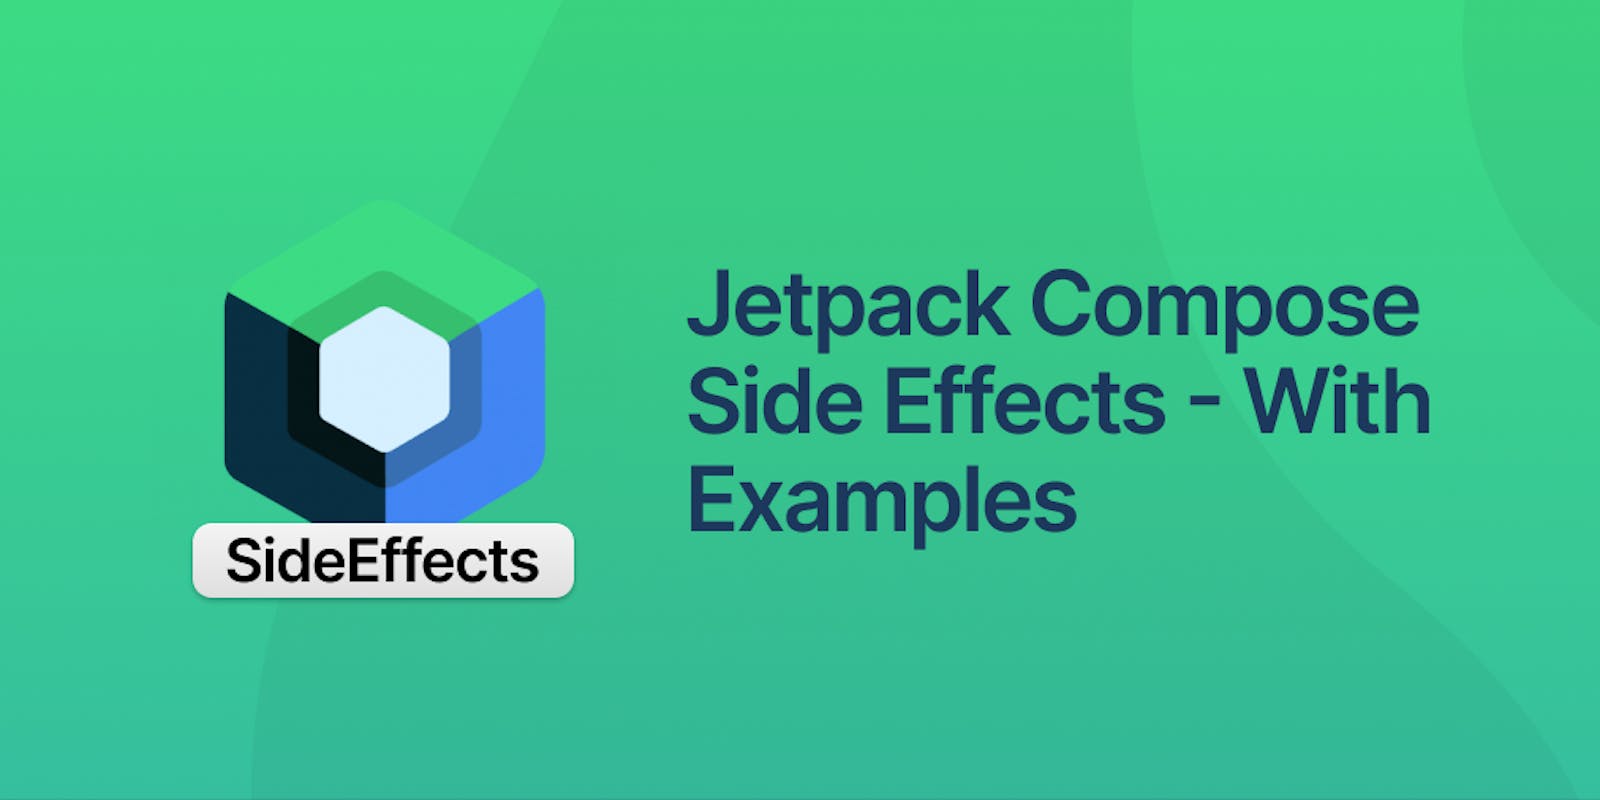 Jetpack Compose Side Effects – With Examples